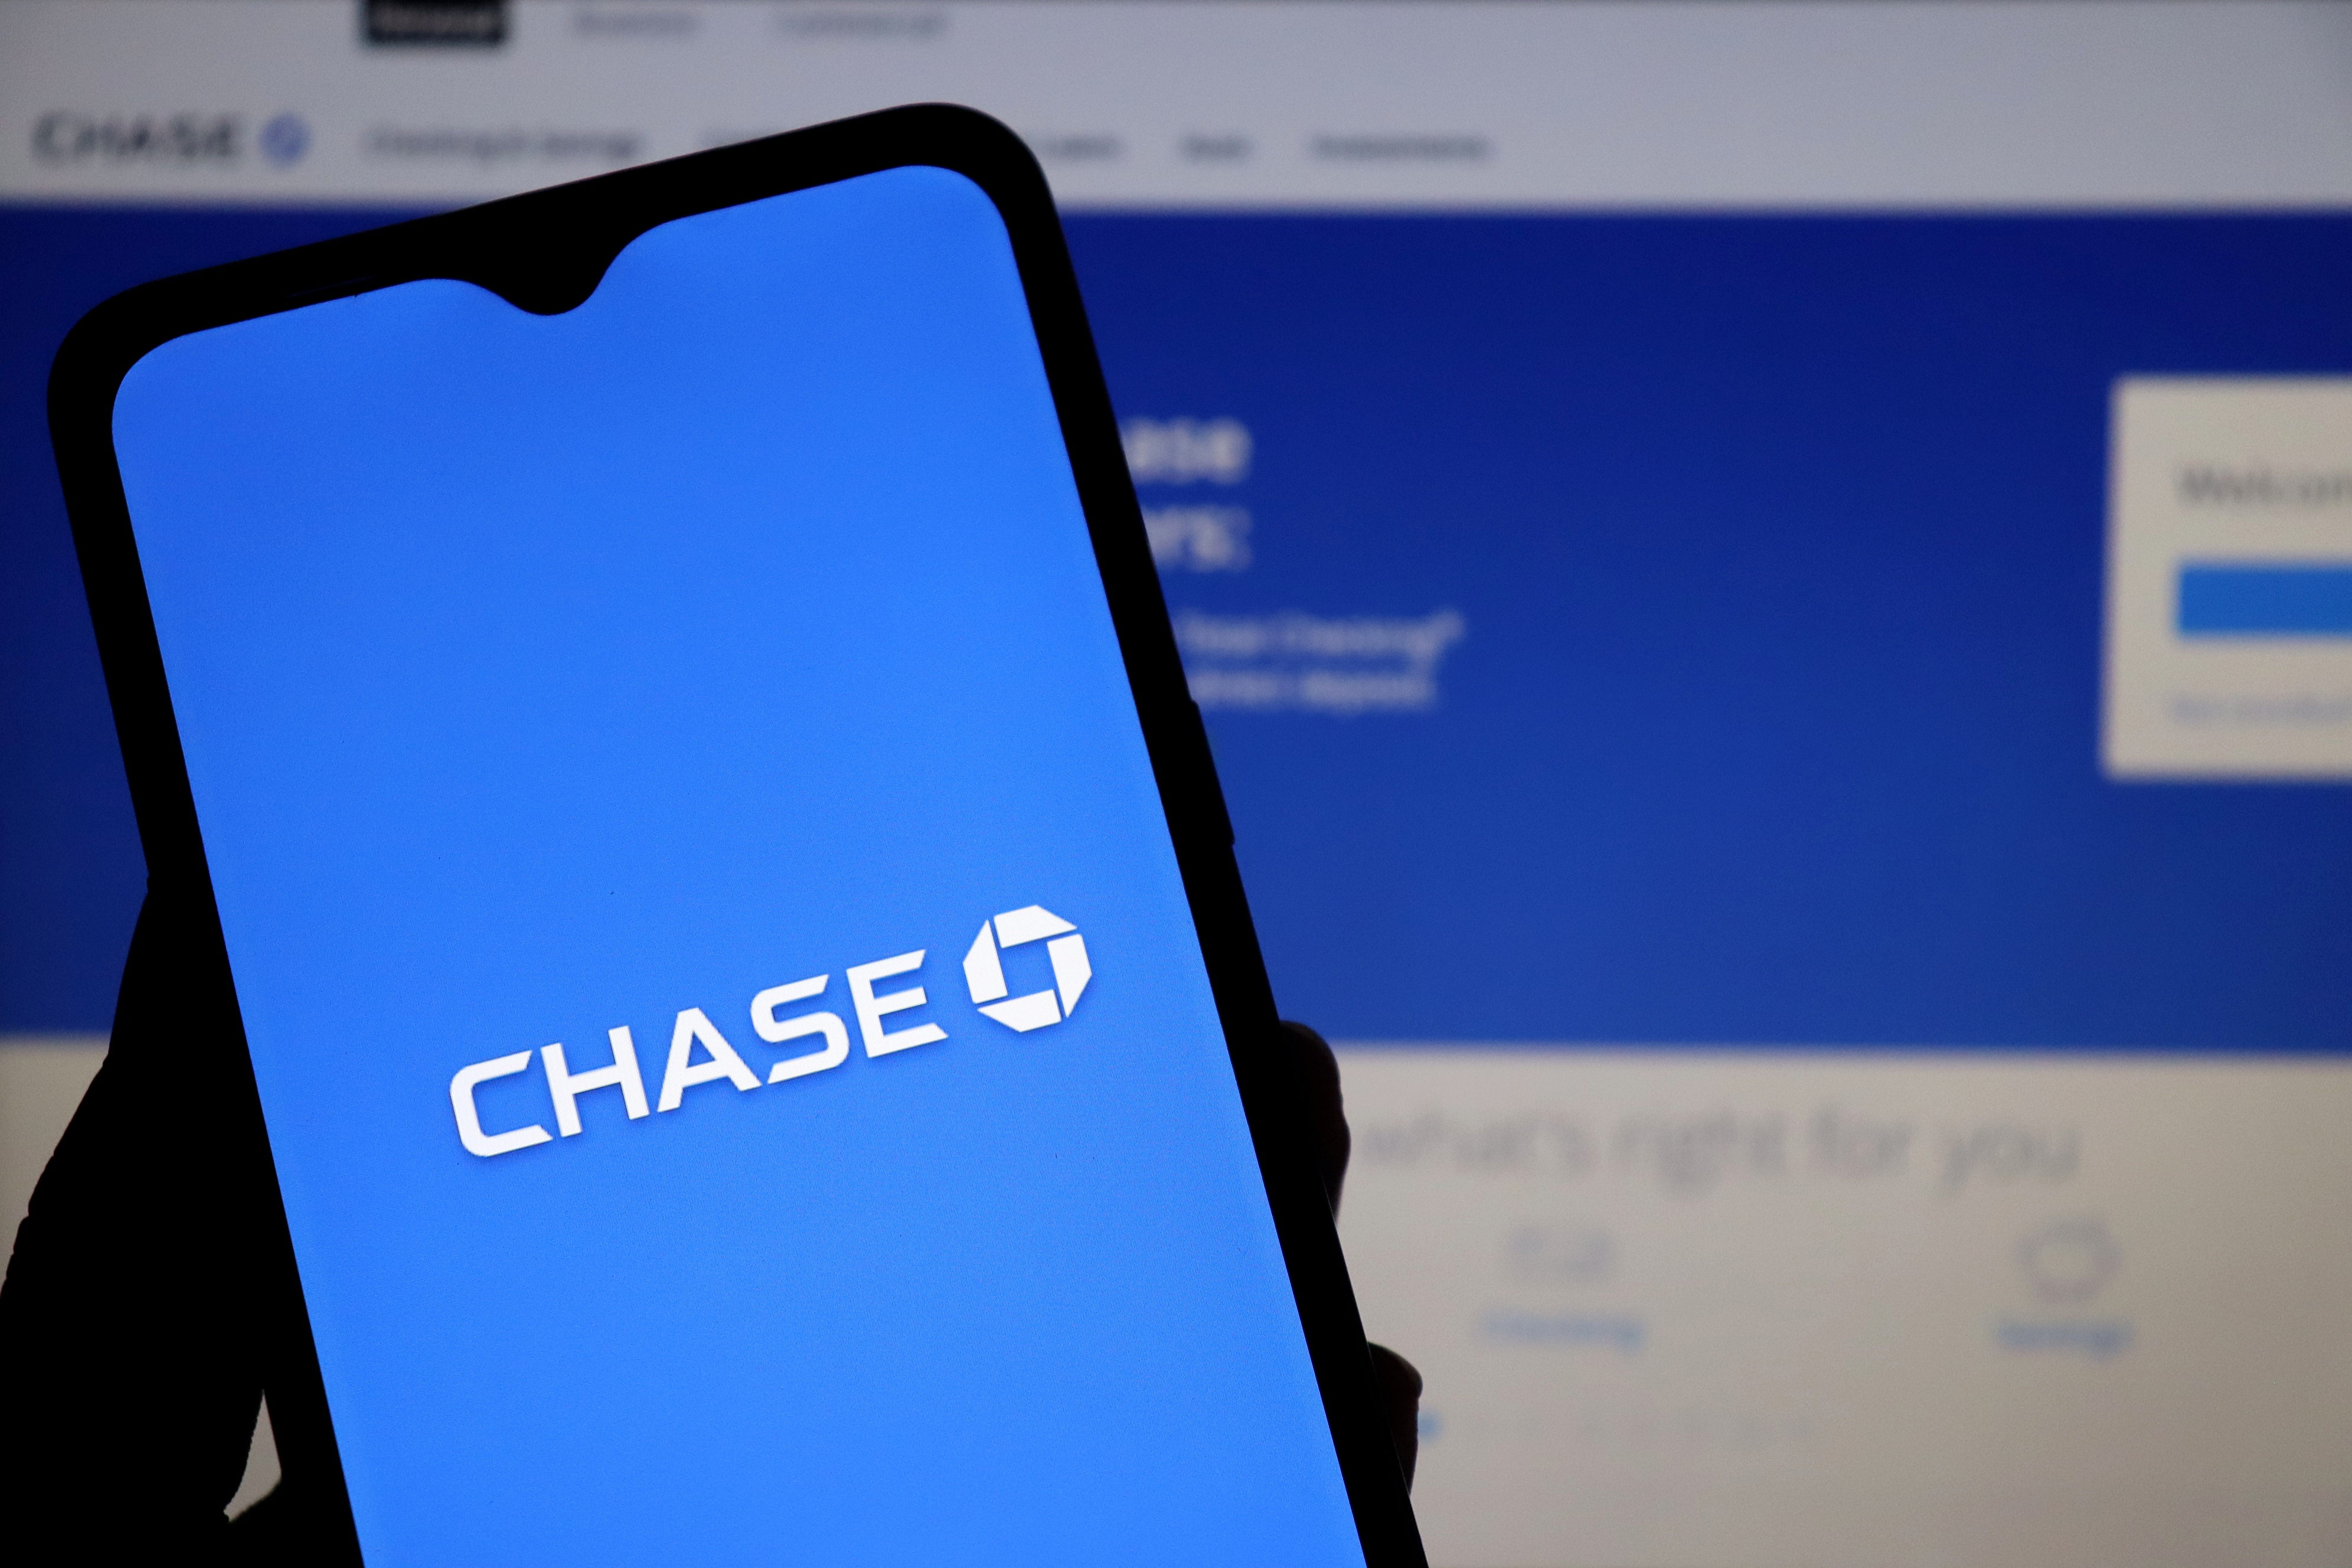 JP Morgan Chase increases net revenue target by $3 billion after acquisition of First Republic